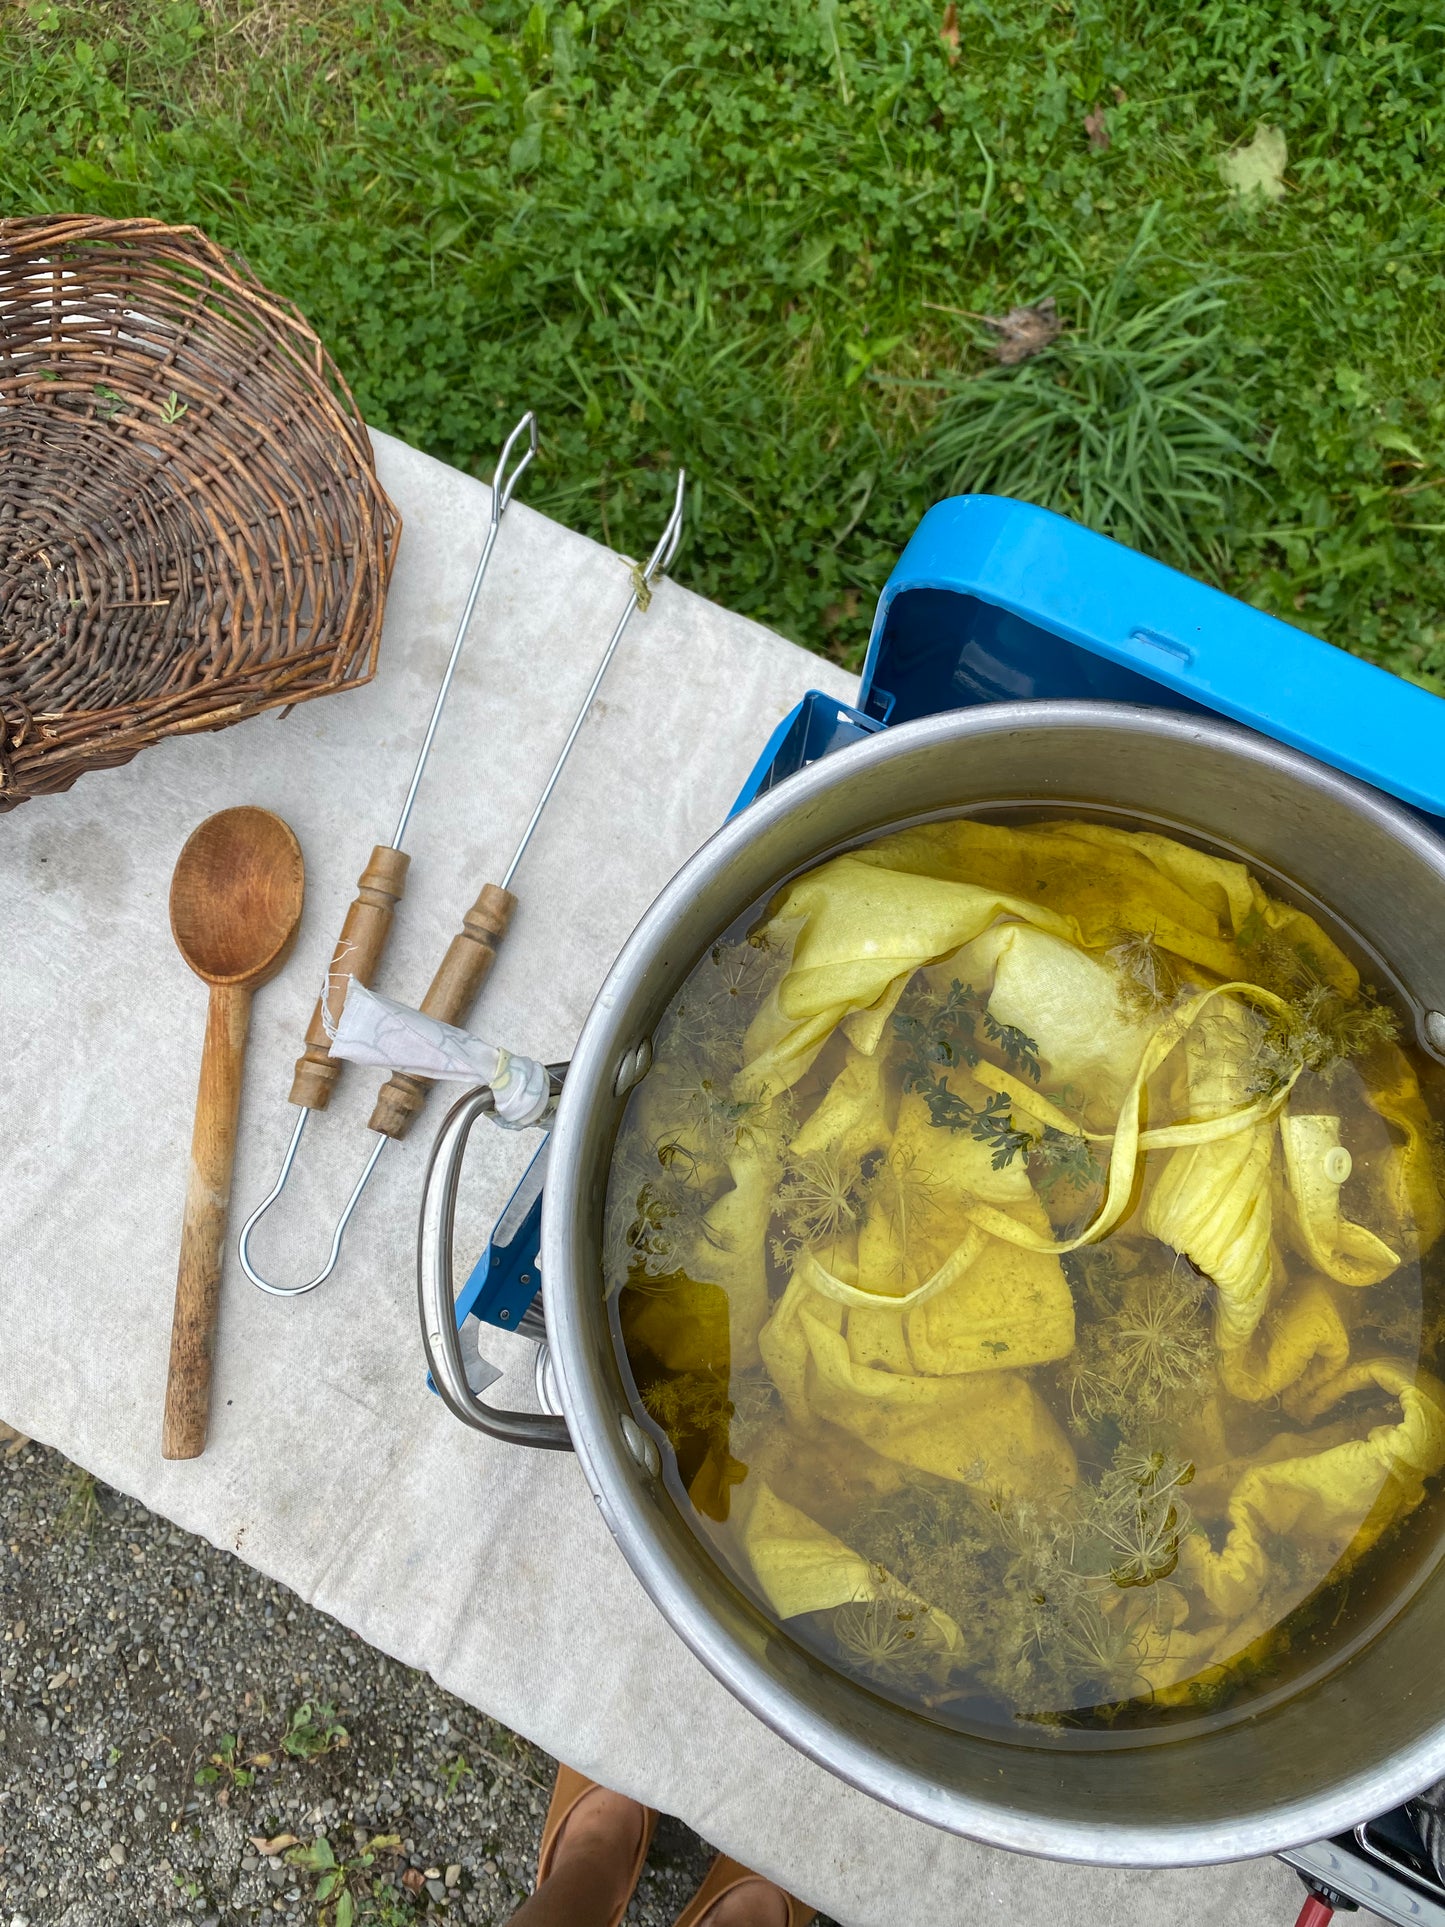 Natural Dyes with Kitchen Scraps with Jamie Lyn Kara | May 19, 1-3:30pm at Troutbeck